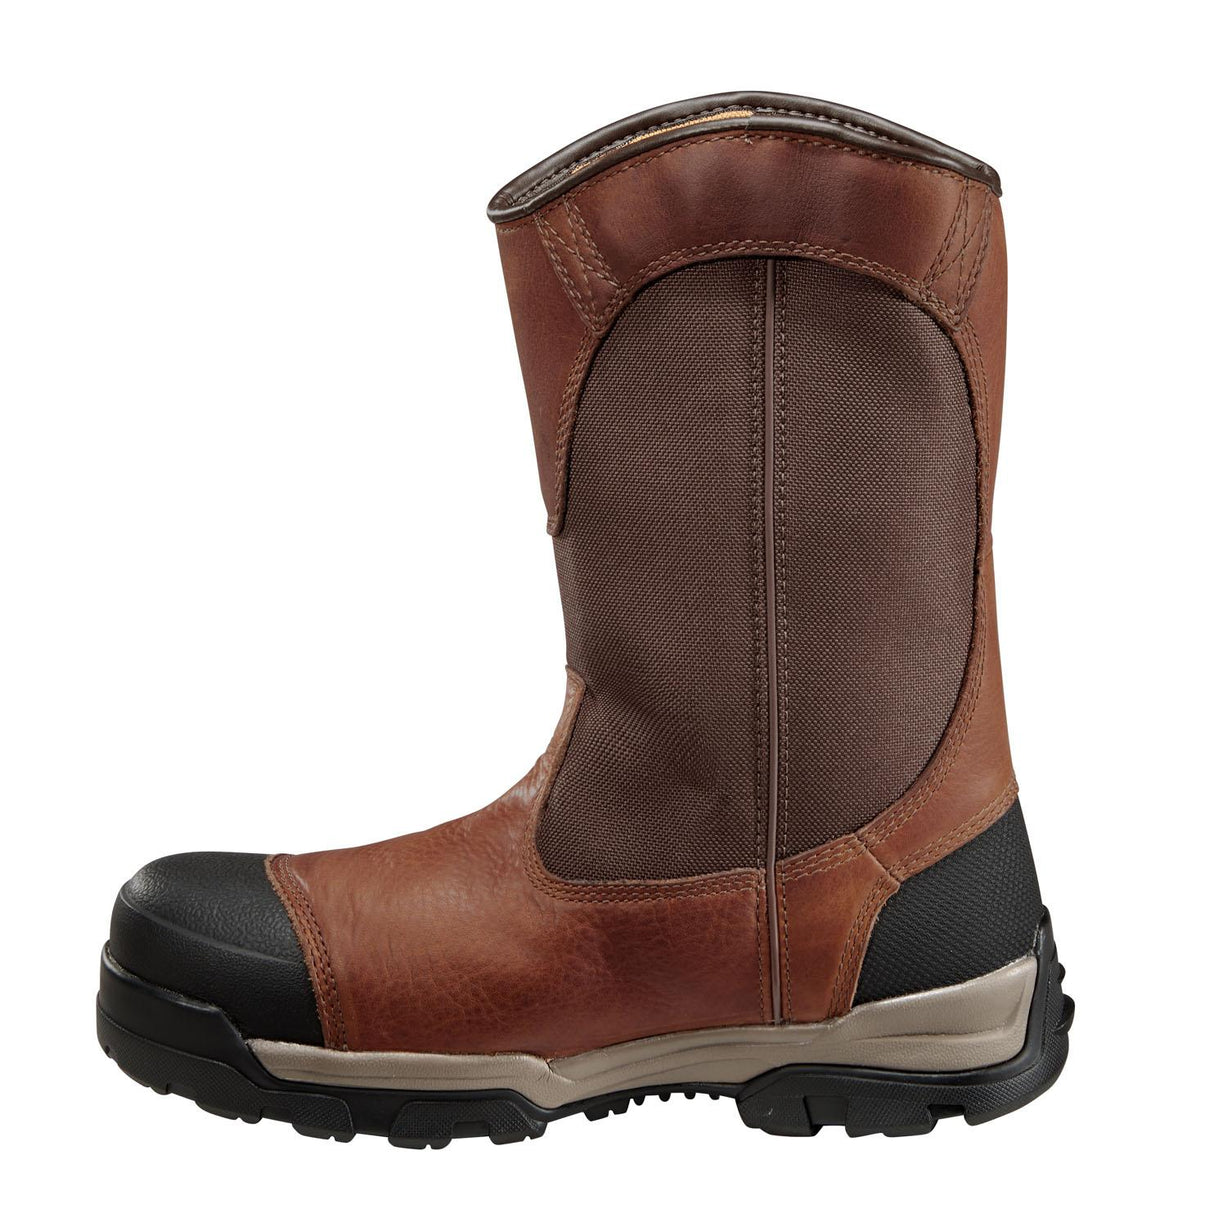 Carhartt-Carhartt Ground Force Wp 10" Composite Toe Red Brown Wellington Work Boot-Steel Toes-3